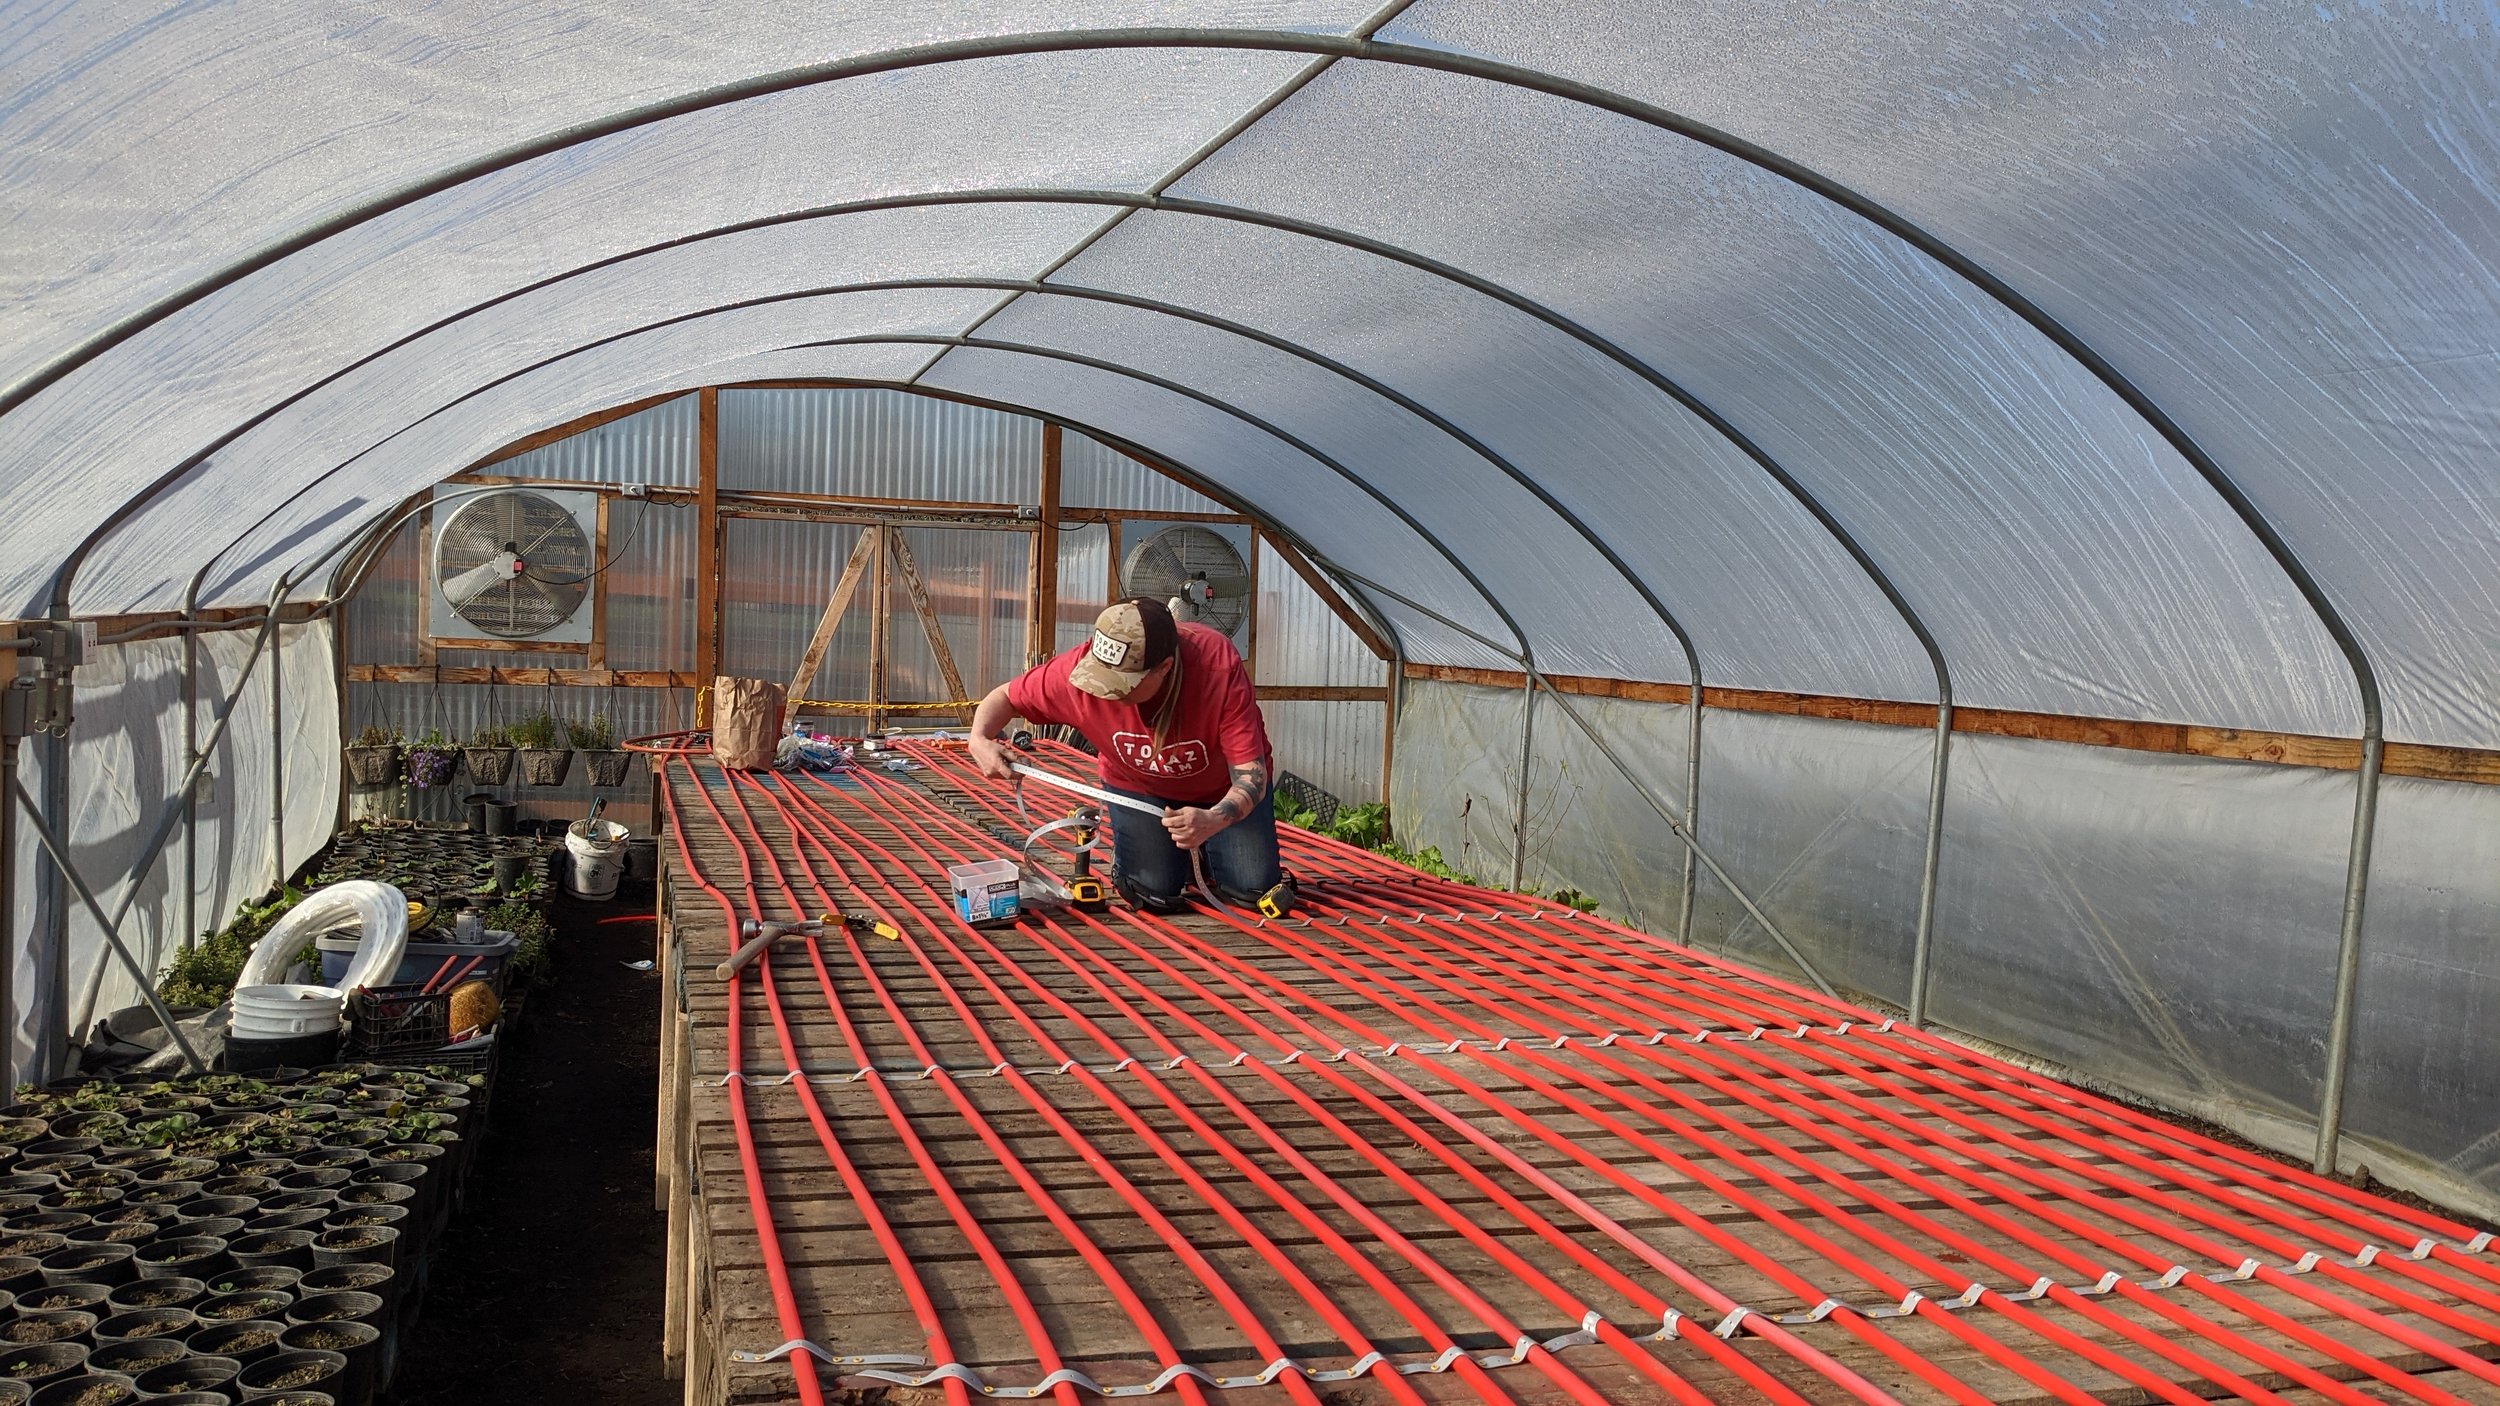  Kat, installing the heated lines for the greenhouse tables. This allowed us to get our starts going early and is much more efficient than heating the greenhouse air. 